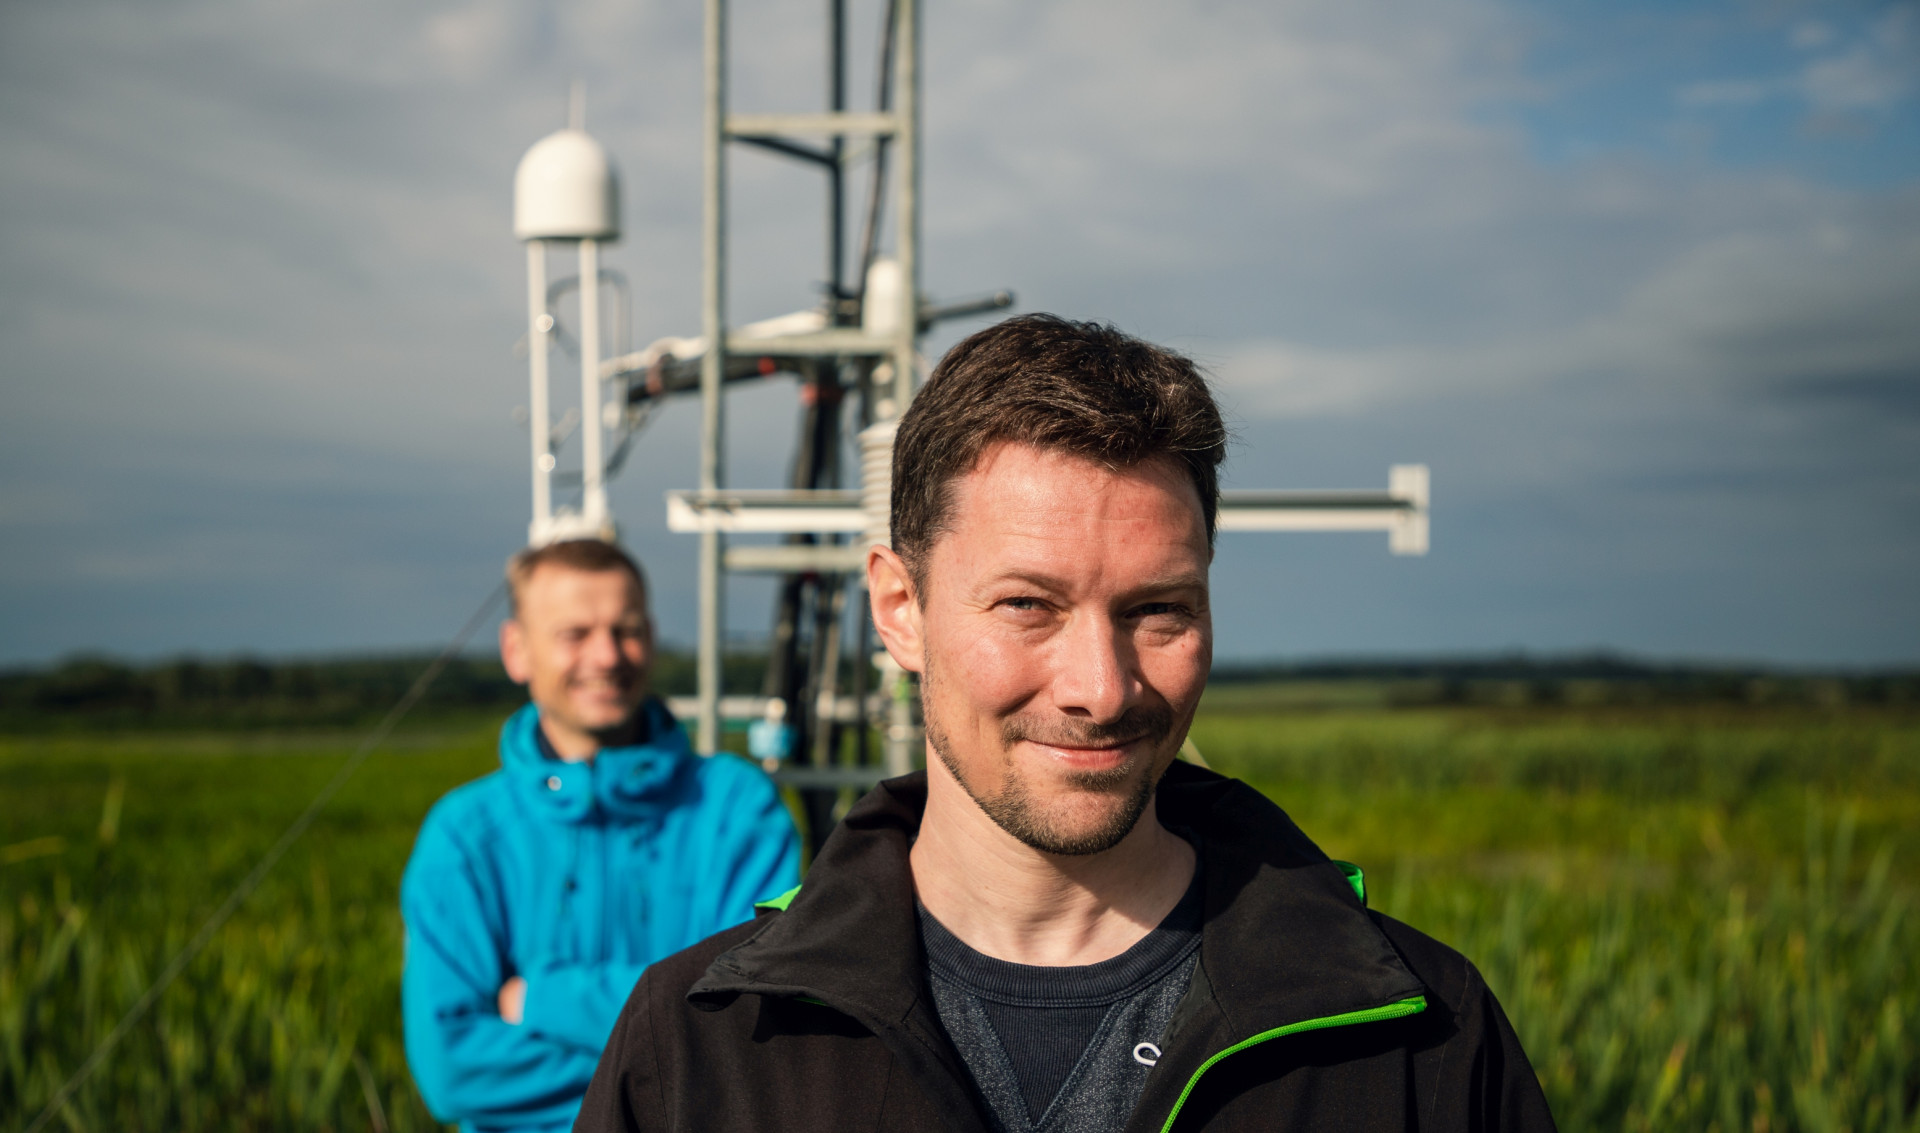 Two men are standing in front of a small tower with sensors in a field full of green plants.